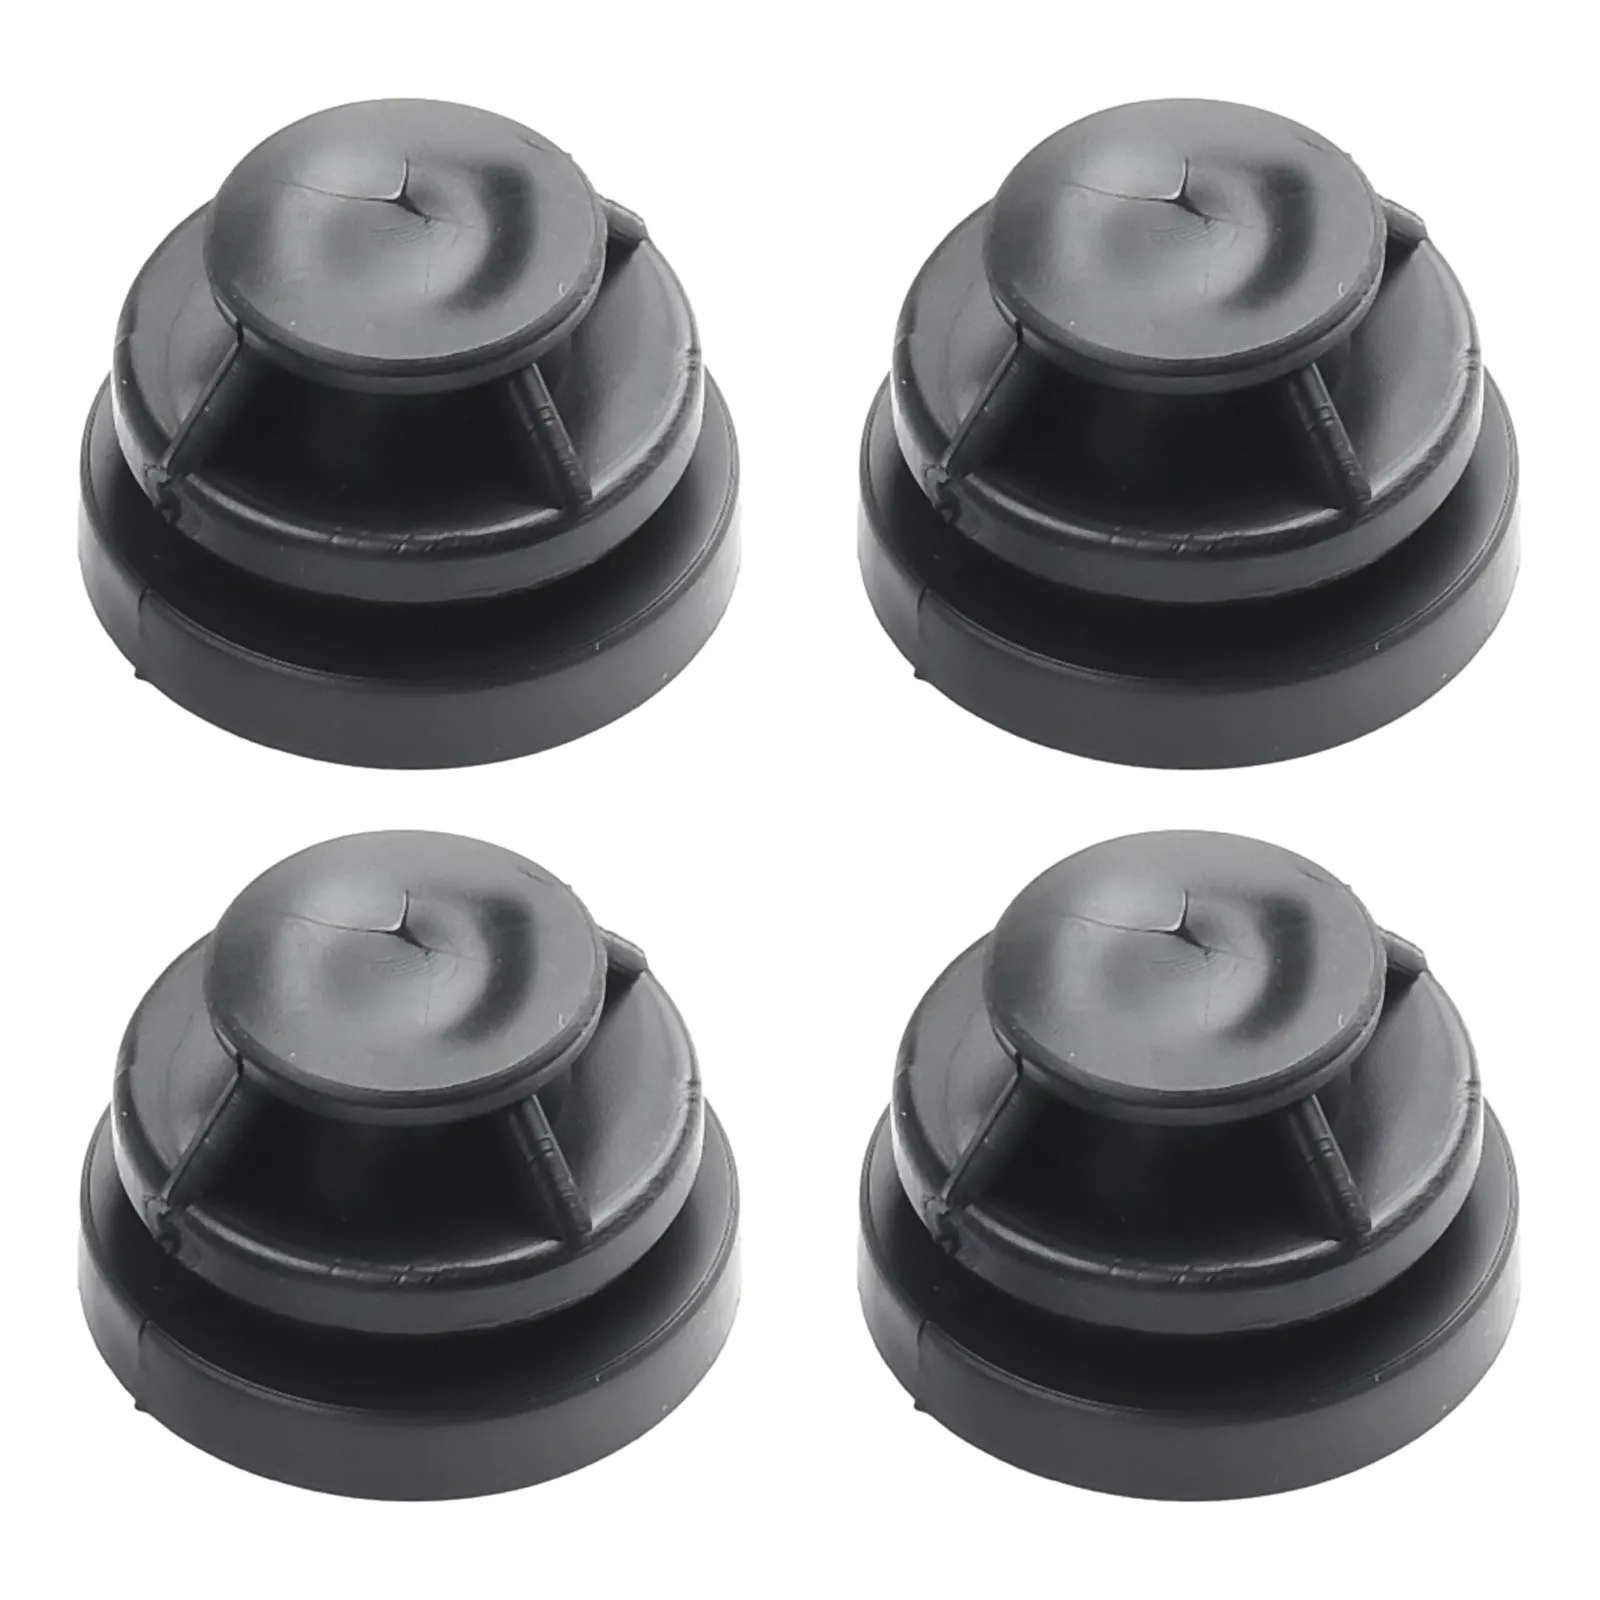 

Cover Car Engine Replacement Rubber Rubber Mounts 4Pcs Black Bush Buffer Car Accessories P30110238 High Quality Practical To Use